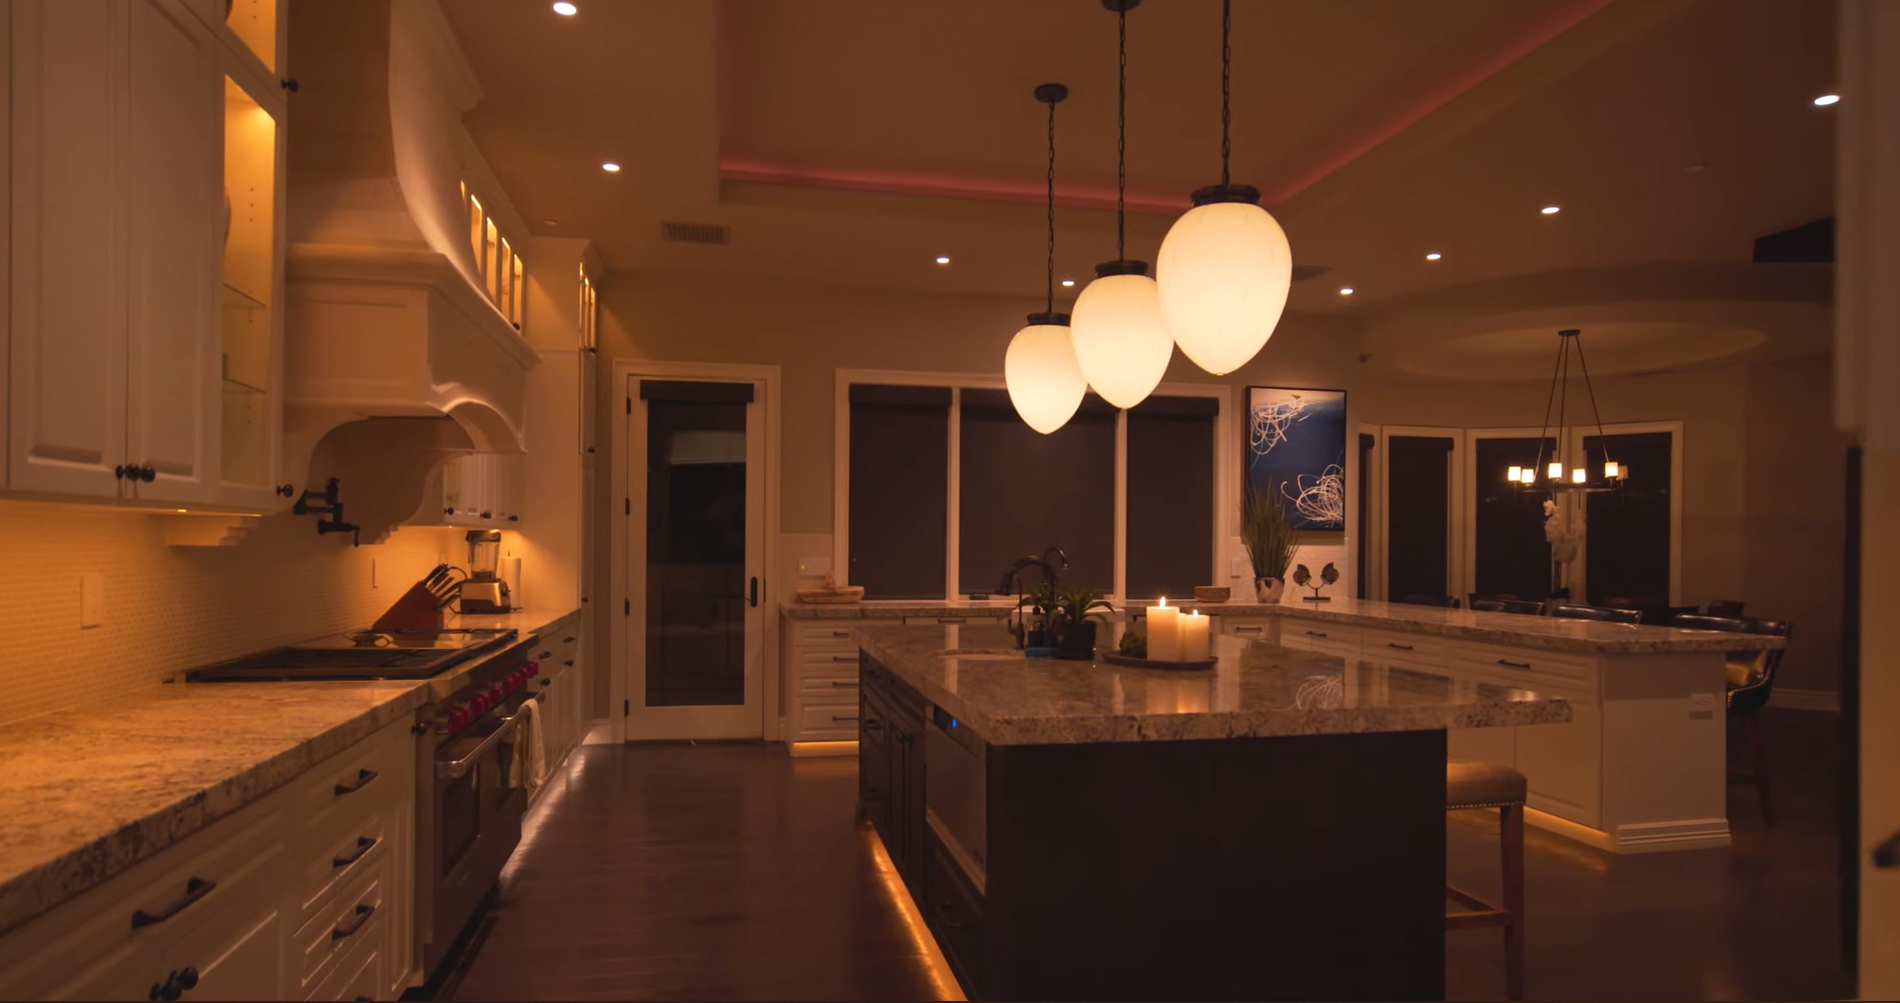 The Latest Recessed Lighting Offers Beauty and Elegance